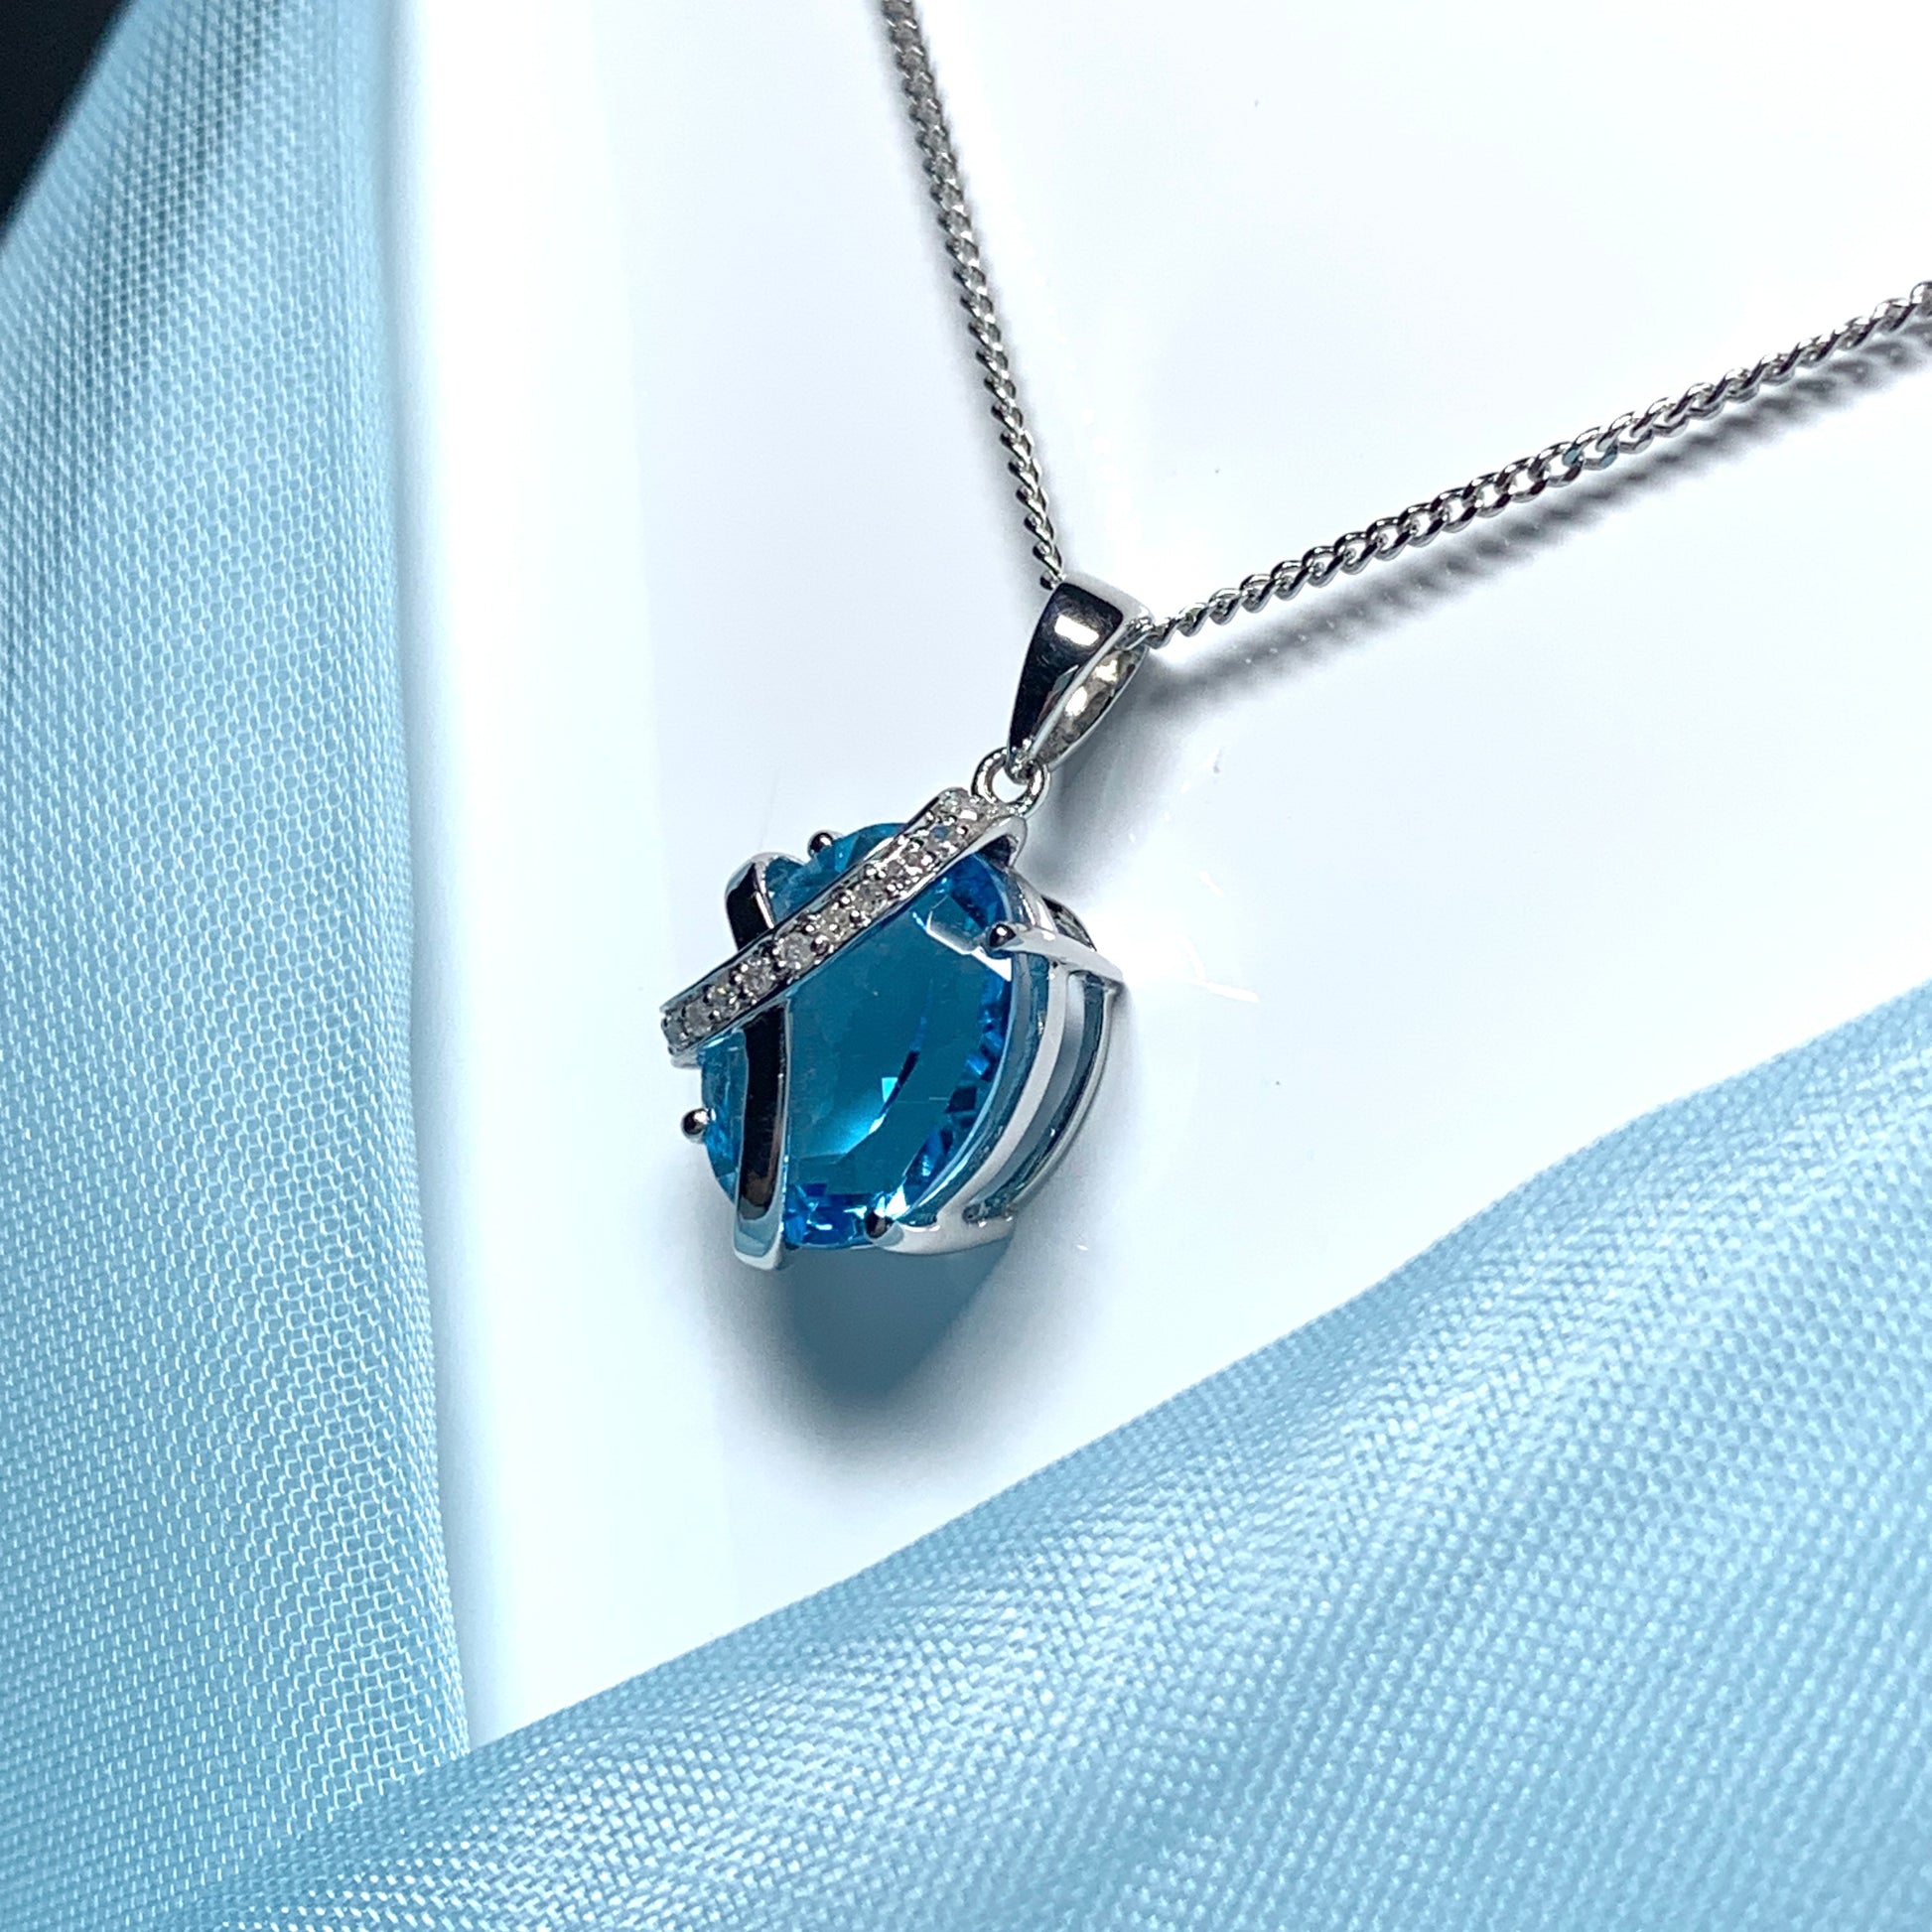 Blue topaz and diamond necklace white gold fancy oval shaped pendant